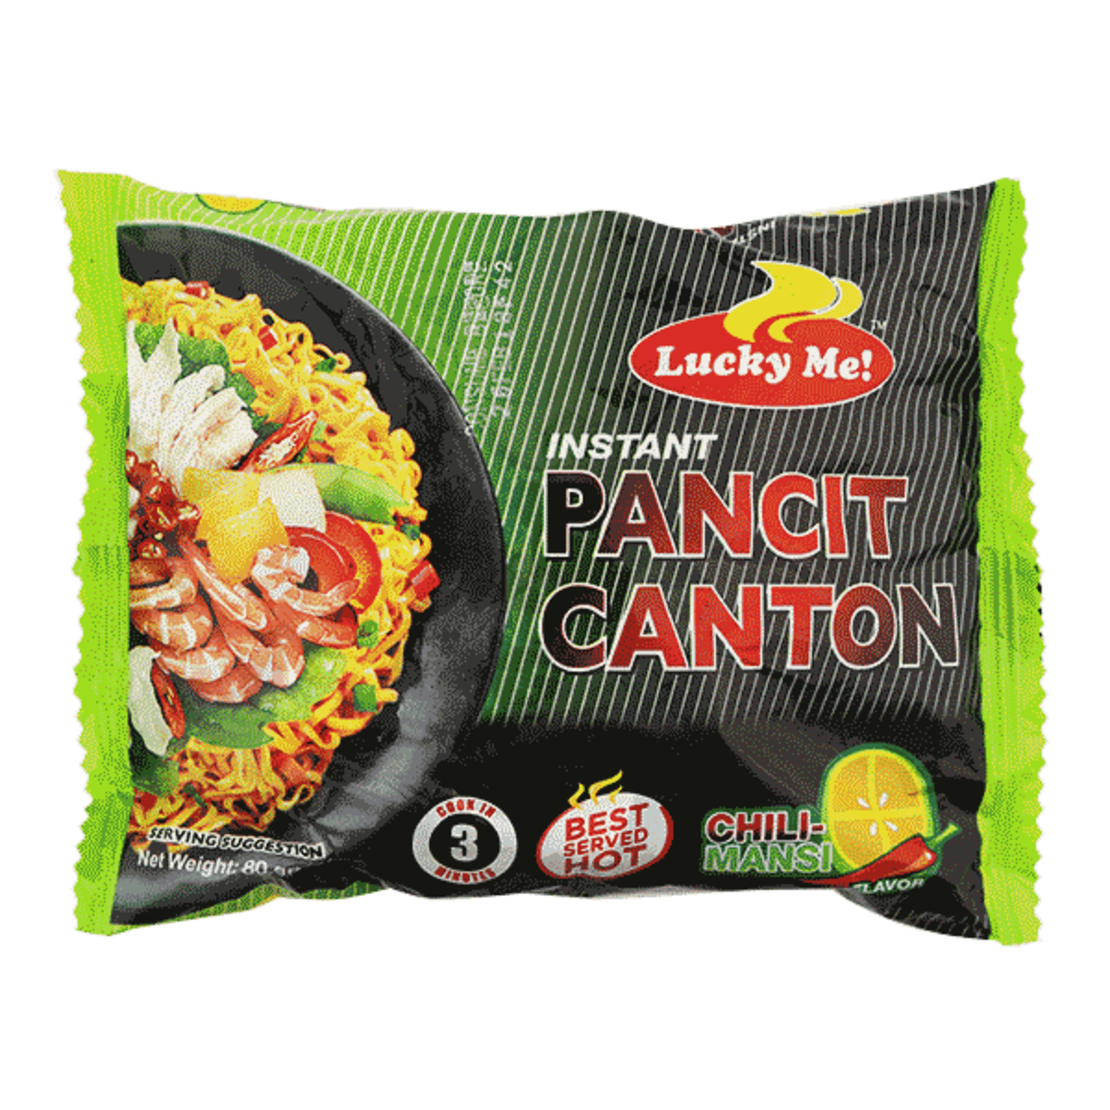 BIG Lucky me - instant Pancit Canton - ChiliMansi